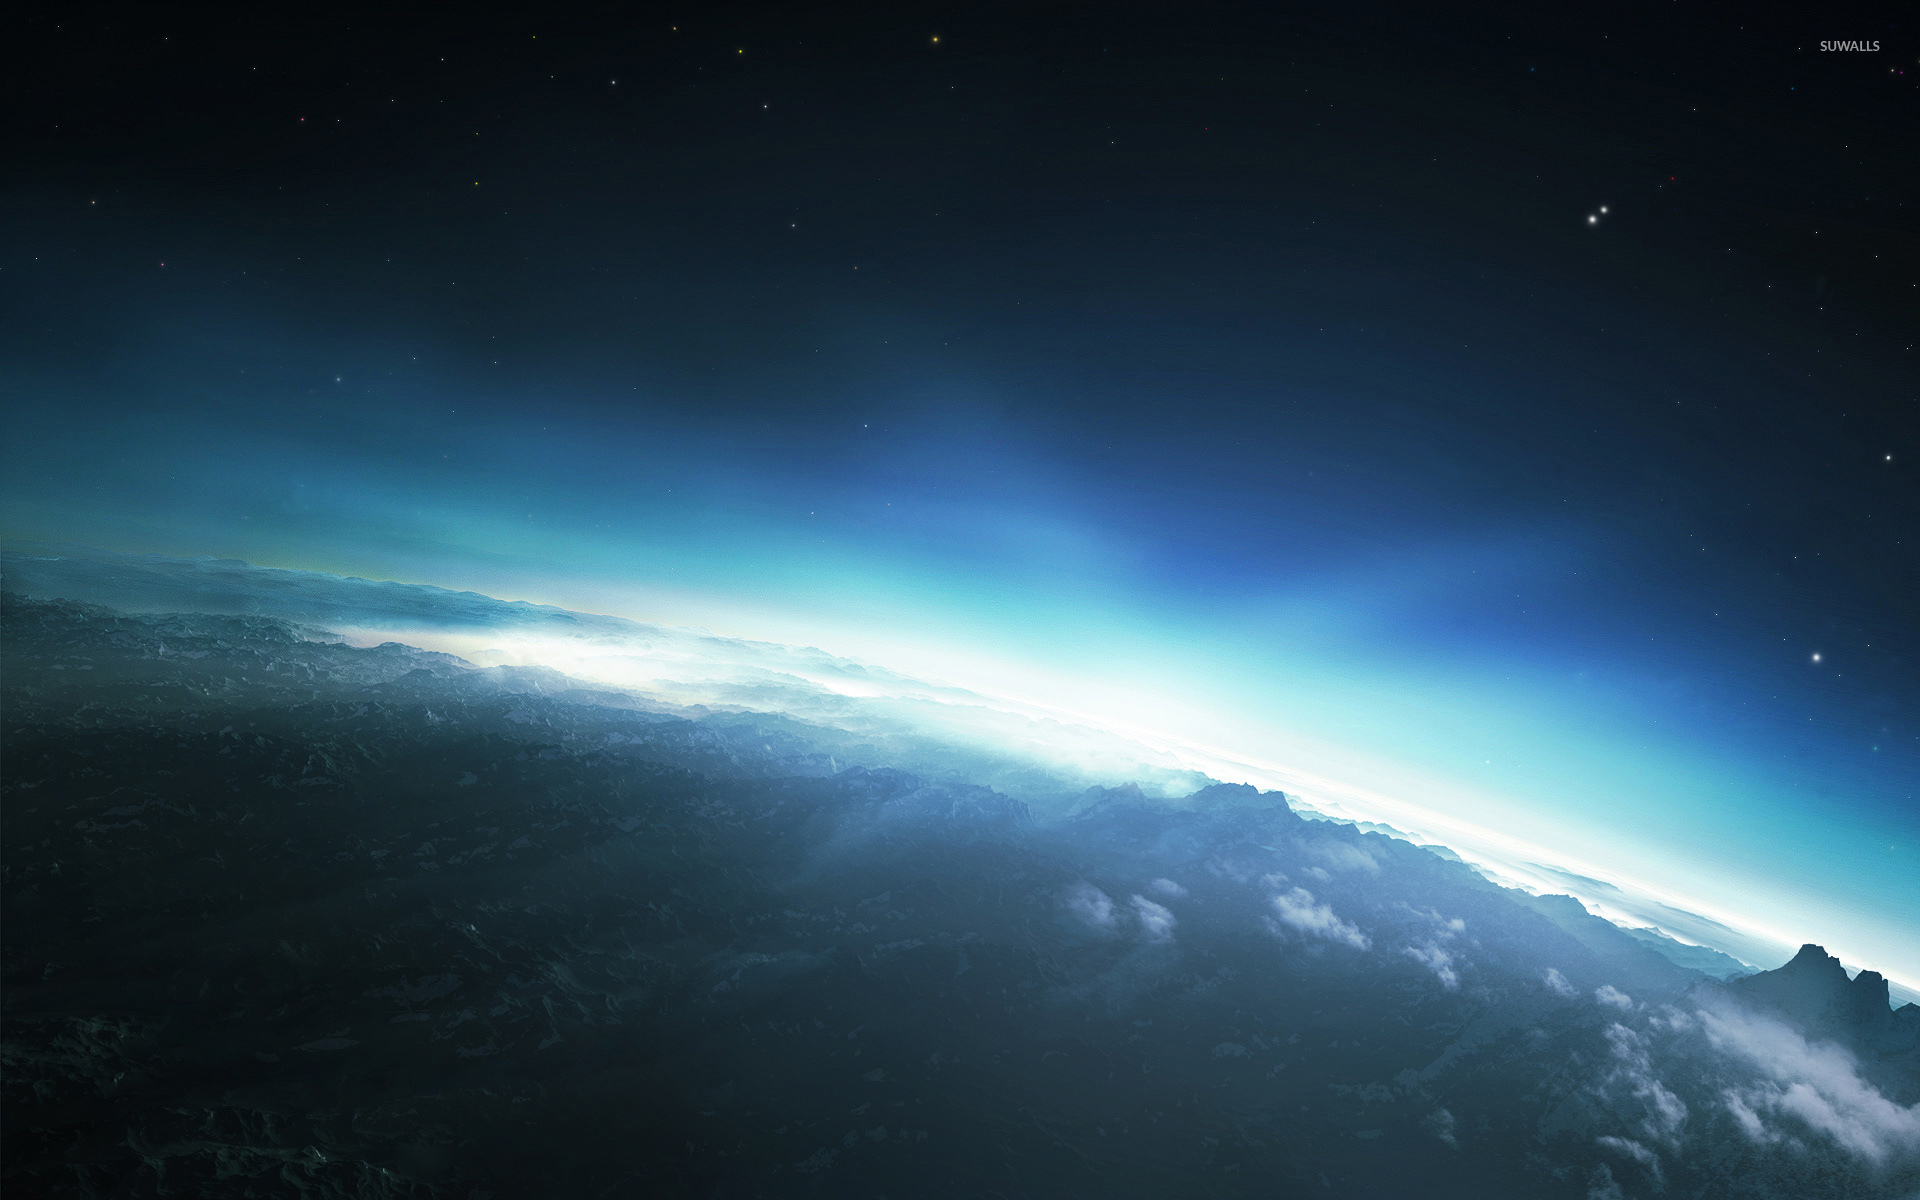 Bright Light Behind The Planet [3] Wallpaper - Tablet Wallpaper 10.1 Lenovo , HD Wallpaper & Backgrounds